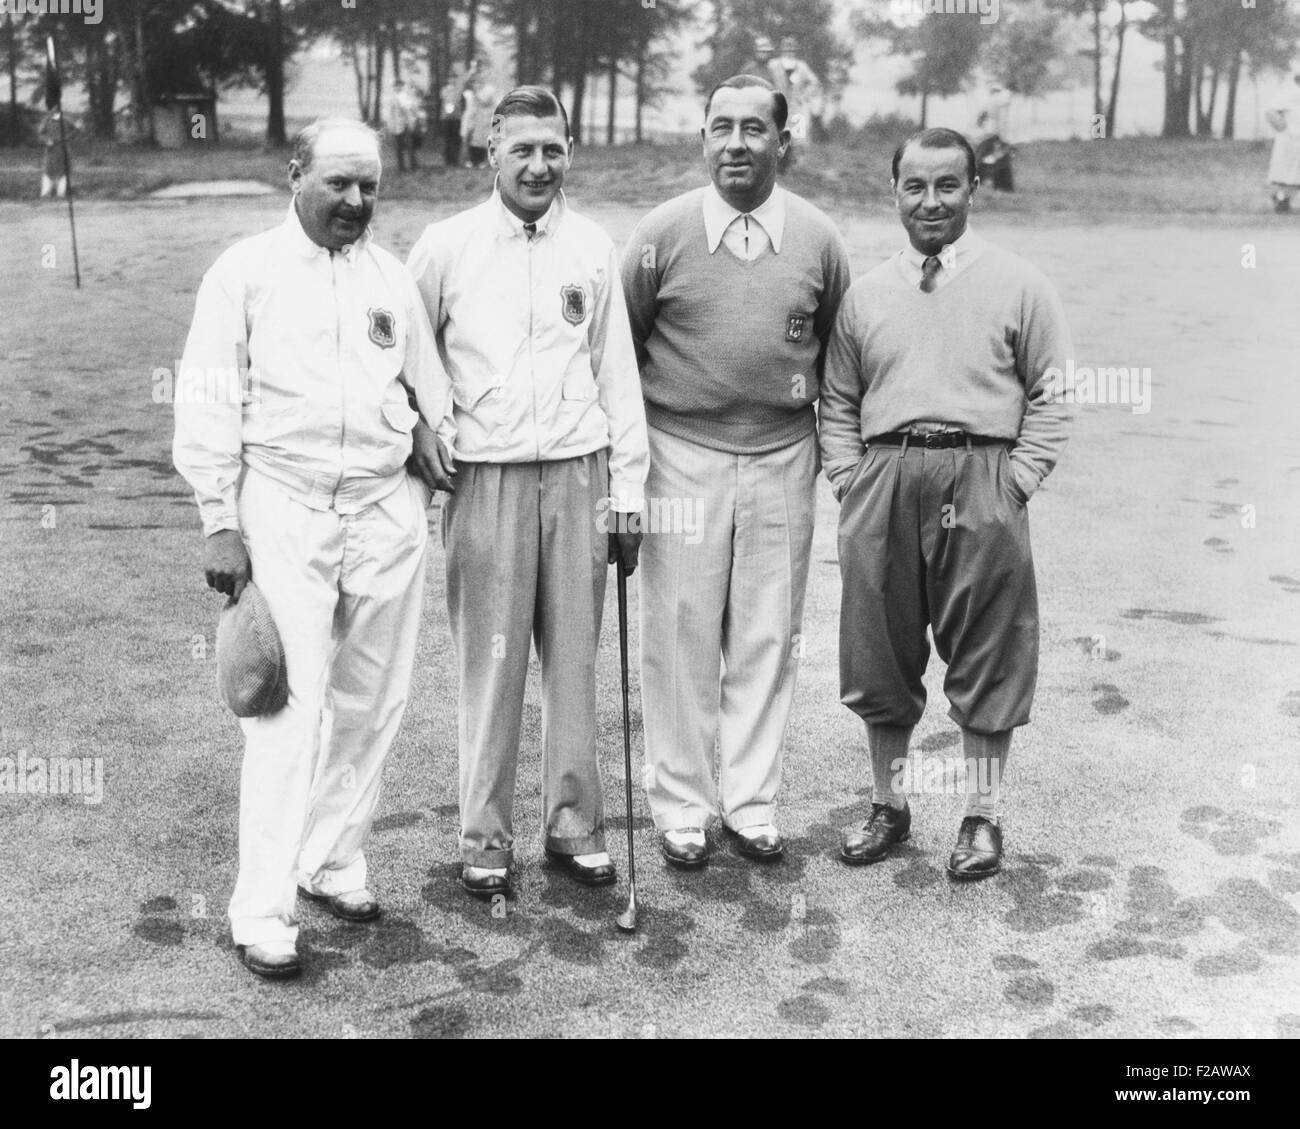 1935 Ryder Cup Scotch foursome. L-R: Alf Perry and John Busson of the British team; and Walter Hagan and Gene Sarazen of the U.S. team. The U.S. team won the semi-annual classic. It was the first of seven consecutive wins by the U.S. side, until the British won in 1957 in England. (CSU 2015 11 1444) Stock Photo